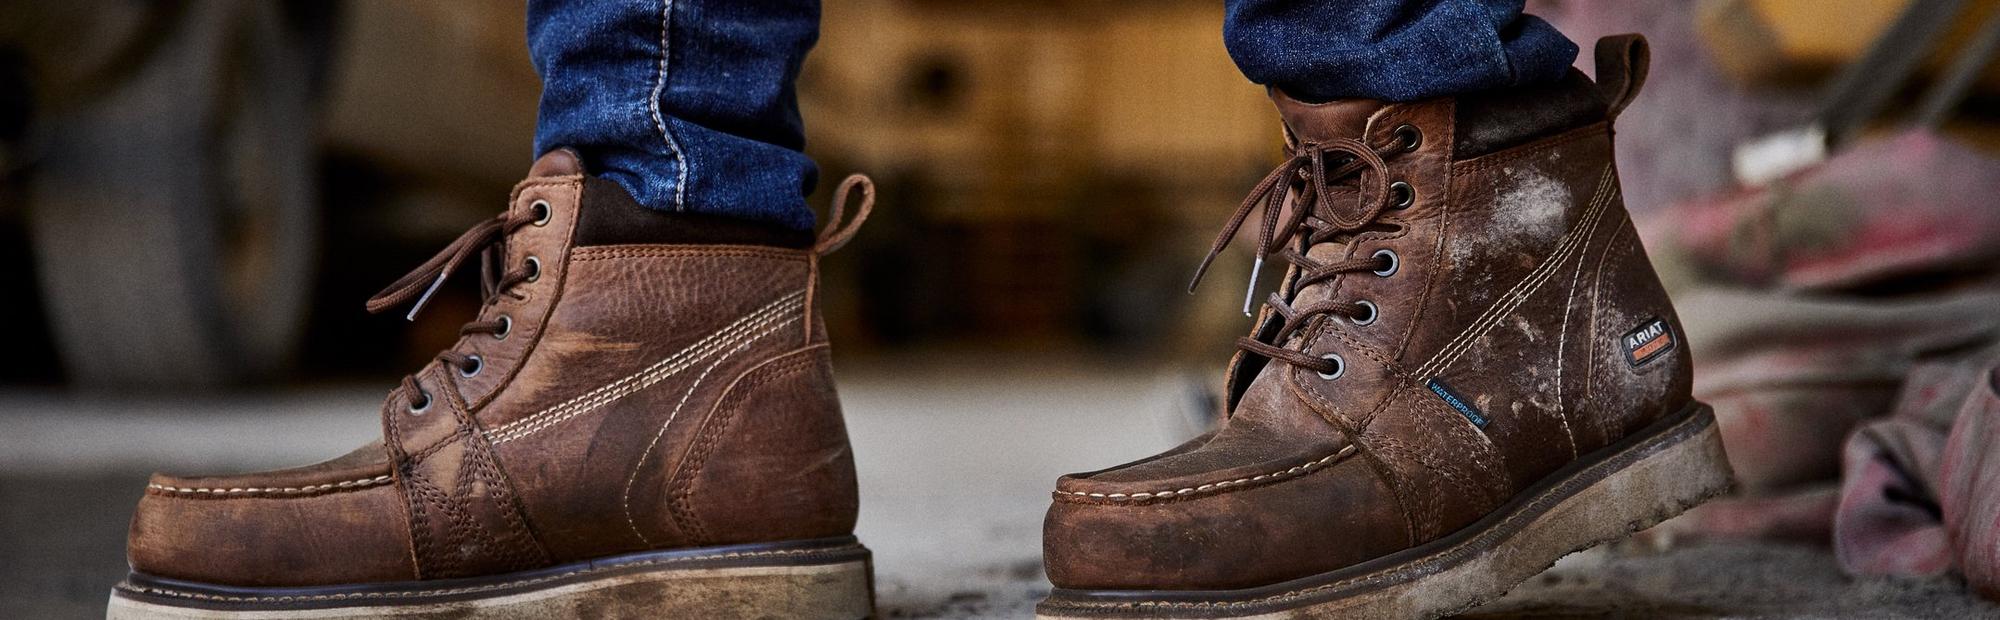 The Top Work Boots for Concrete Floors Best Work Boots with Arch Support for Concrete Floors